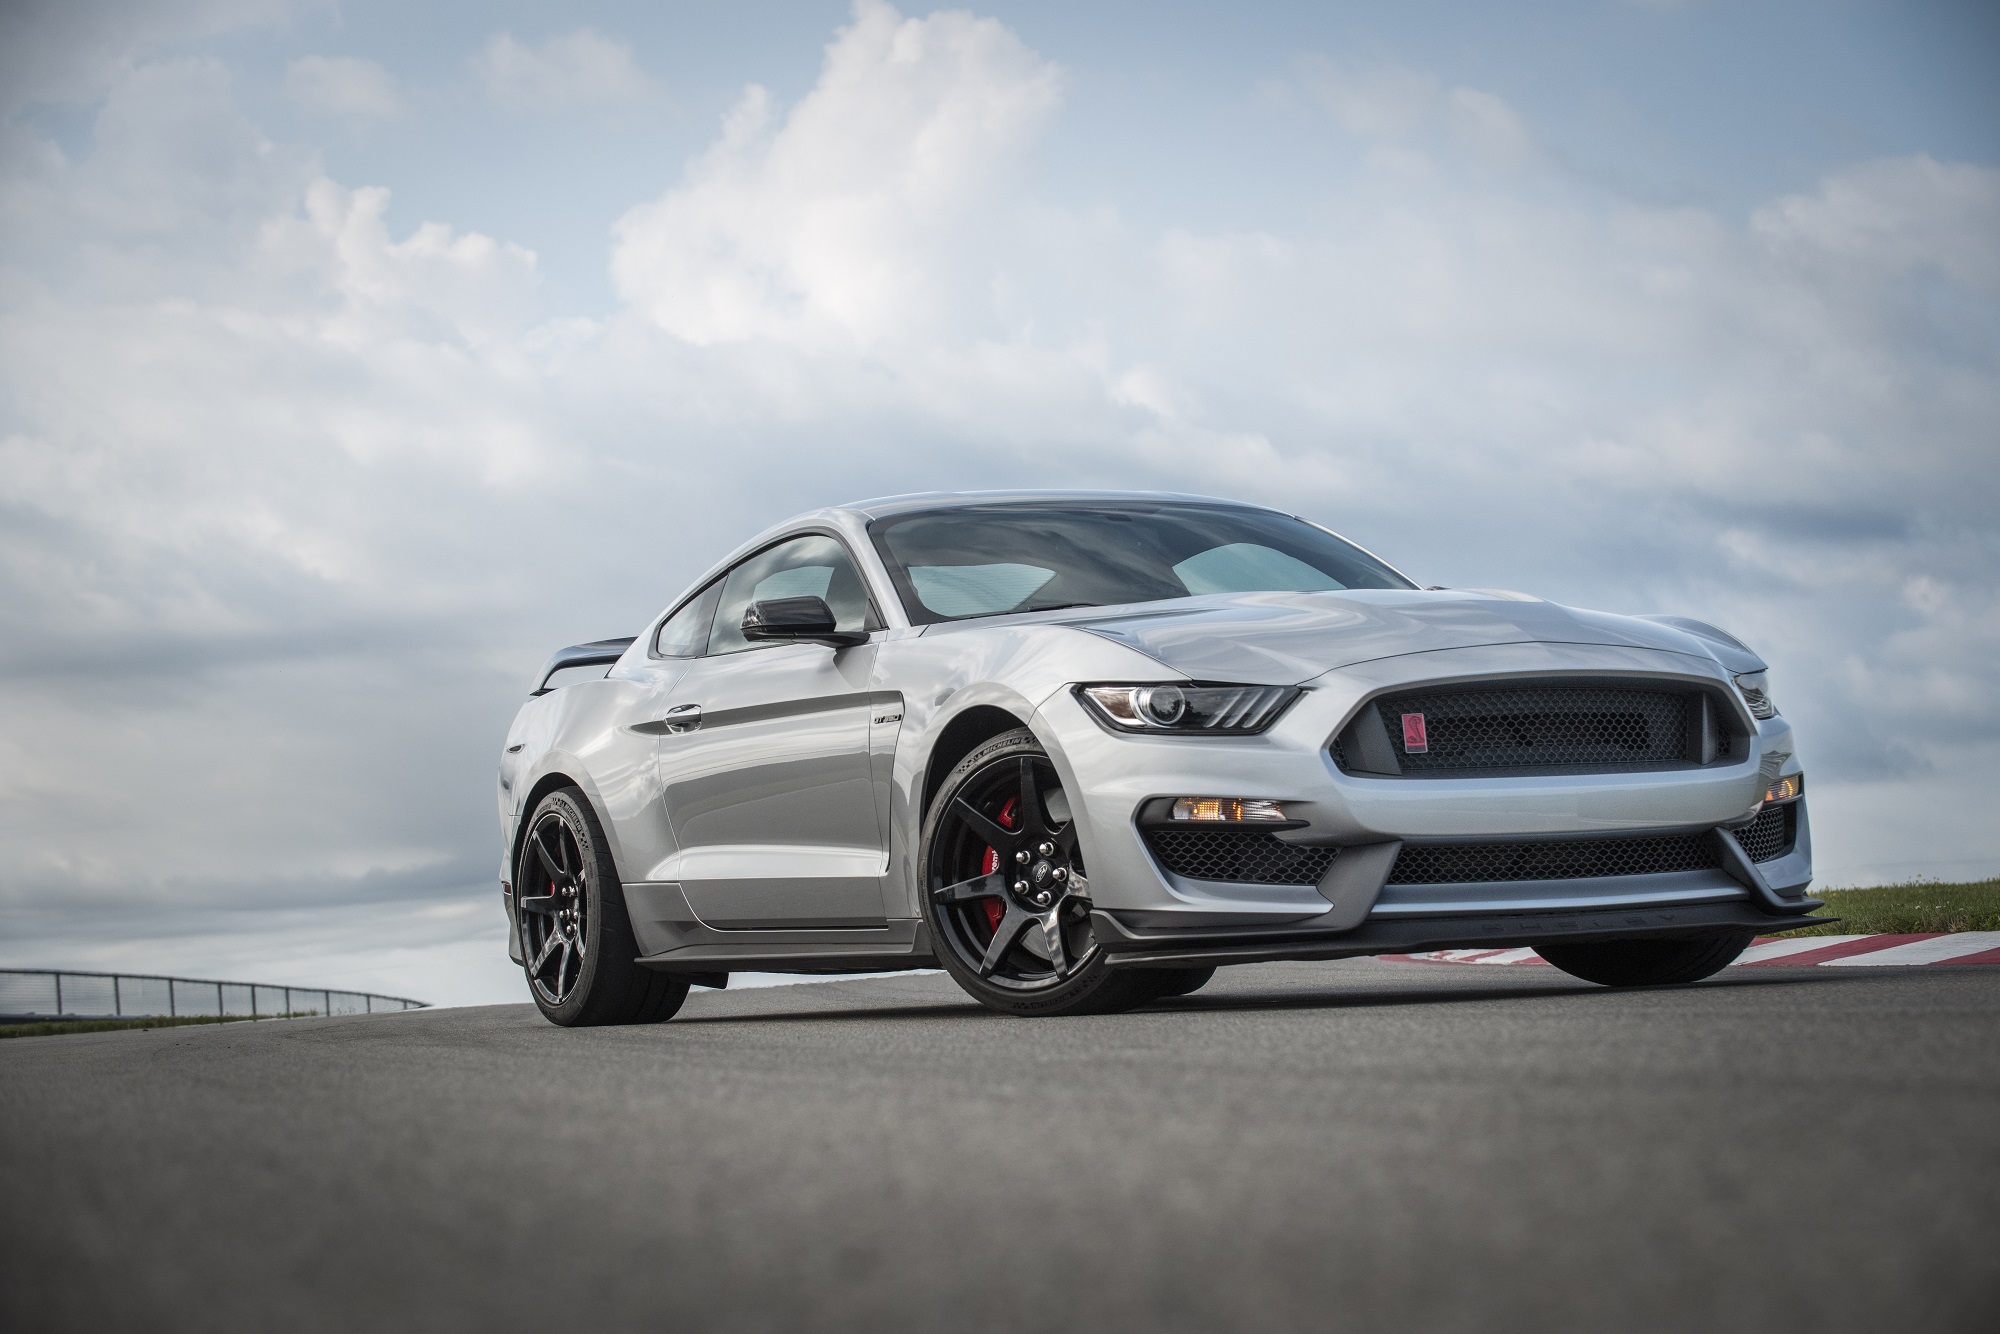 The Shelby GT350 is one of the most special Ford Mustangs in the marque's lineup.